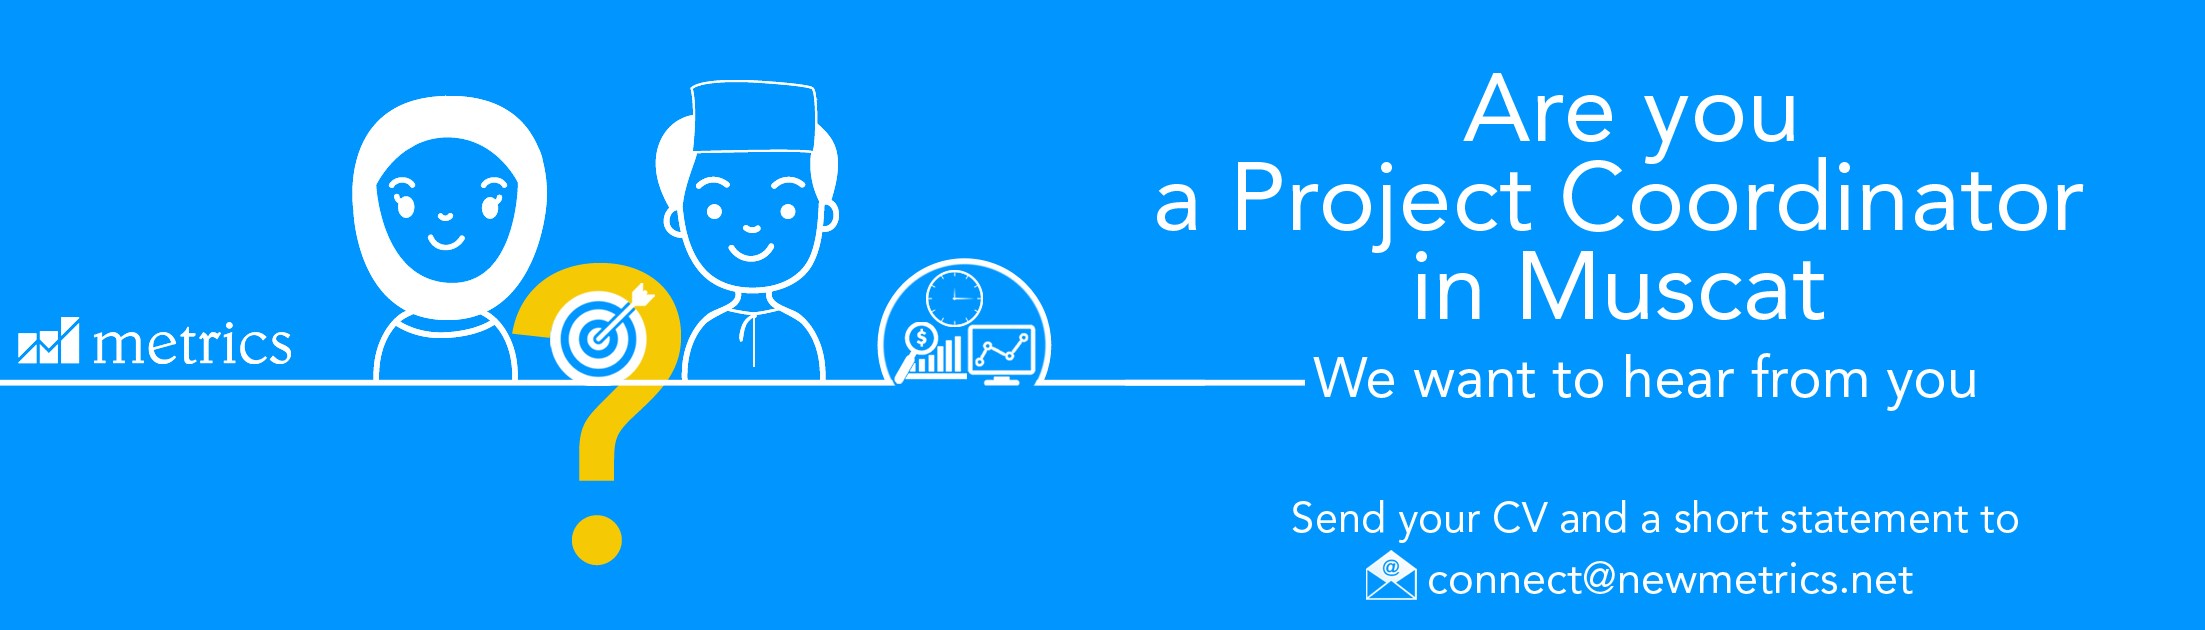 Are you a project coordinator in Muscat